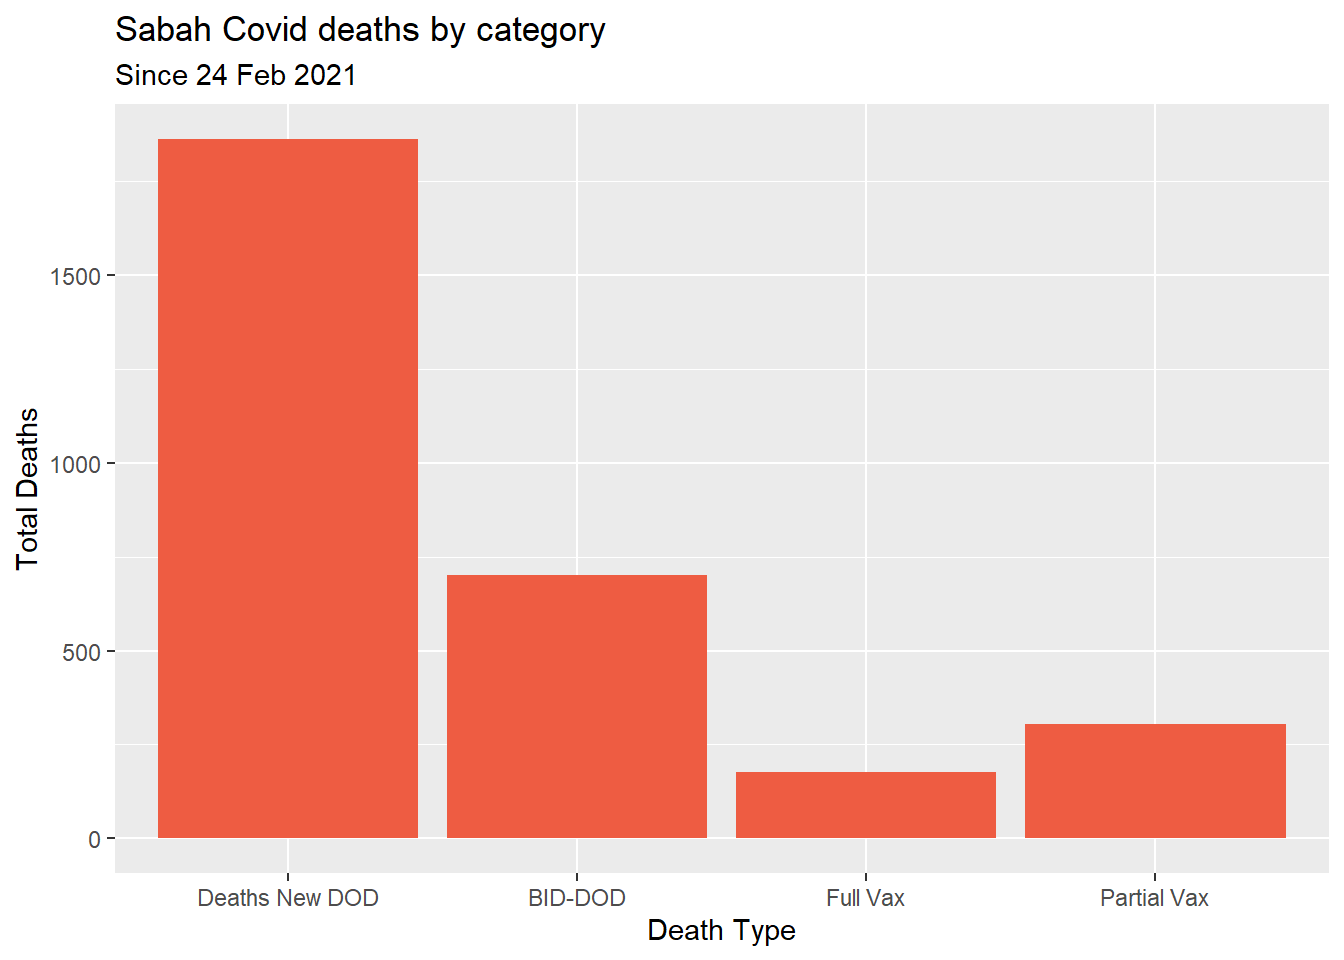 Types of Covid deaths for selected state